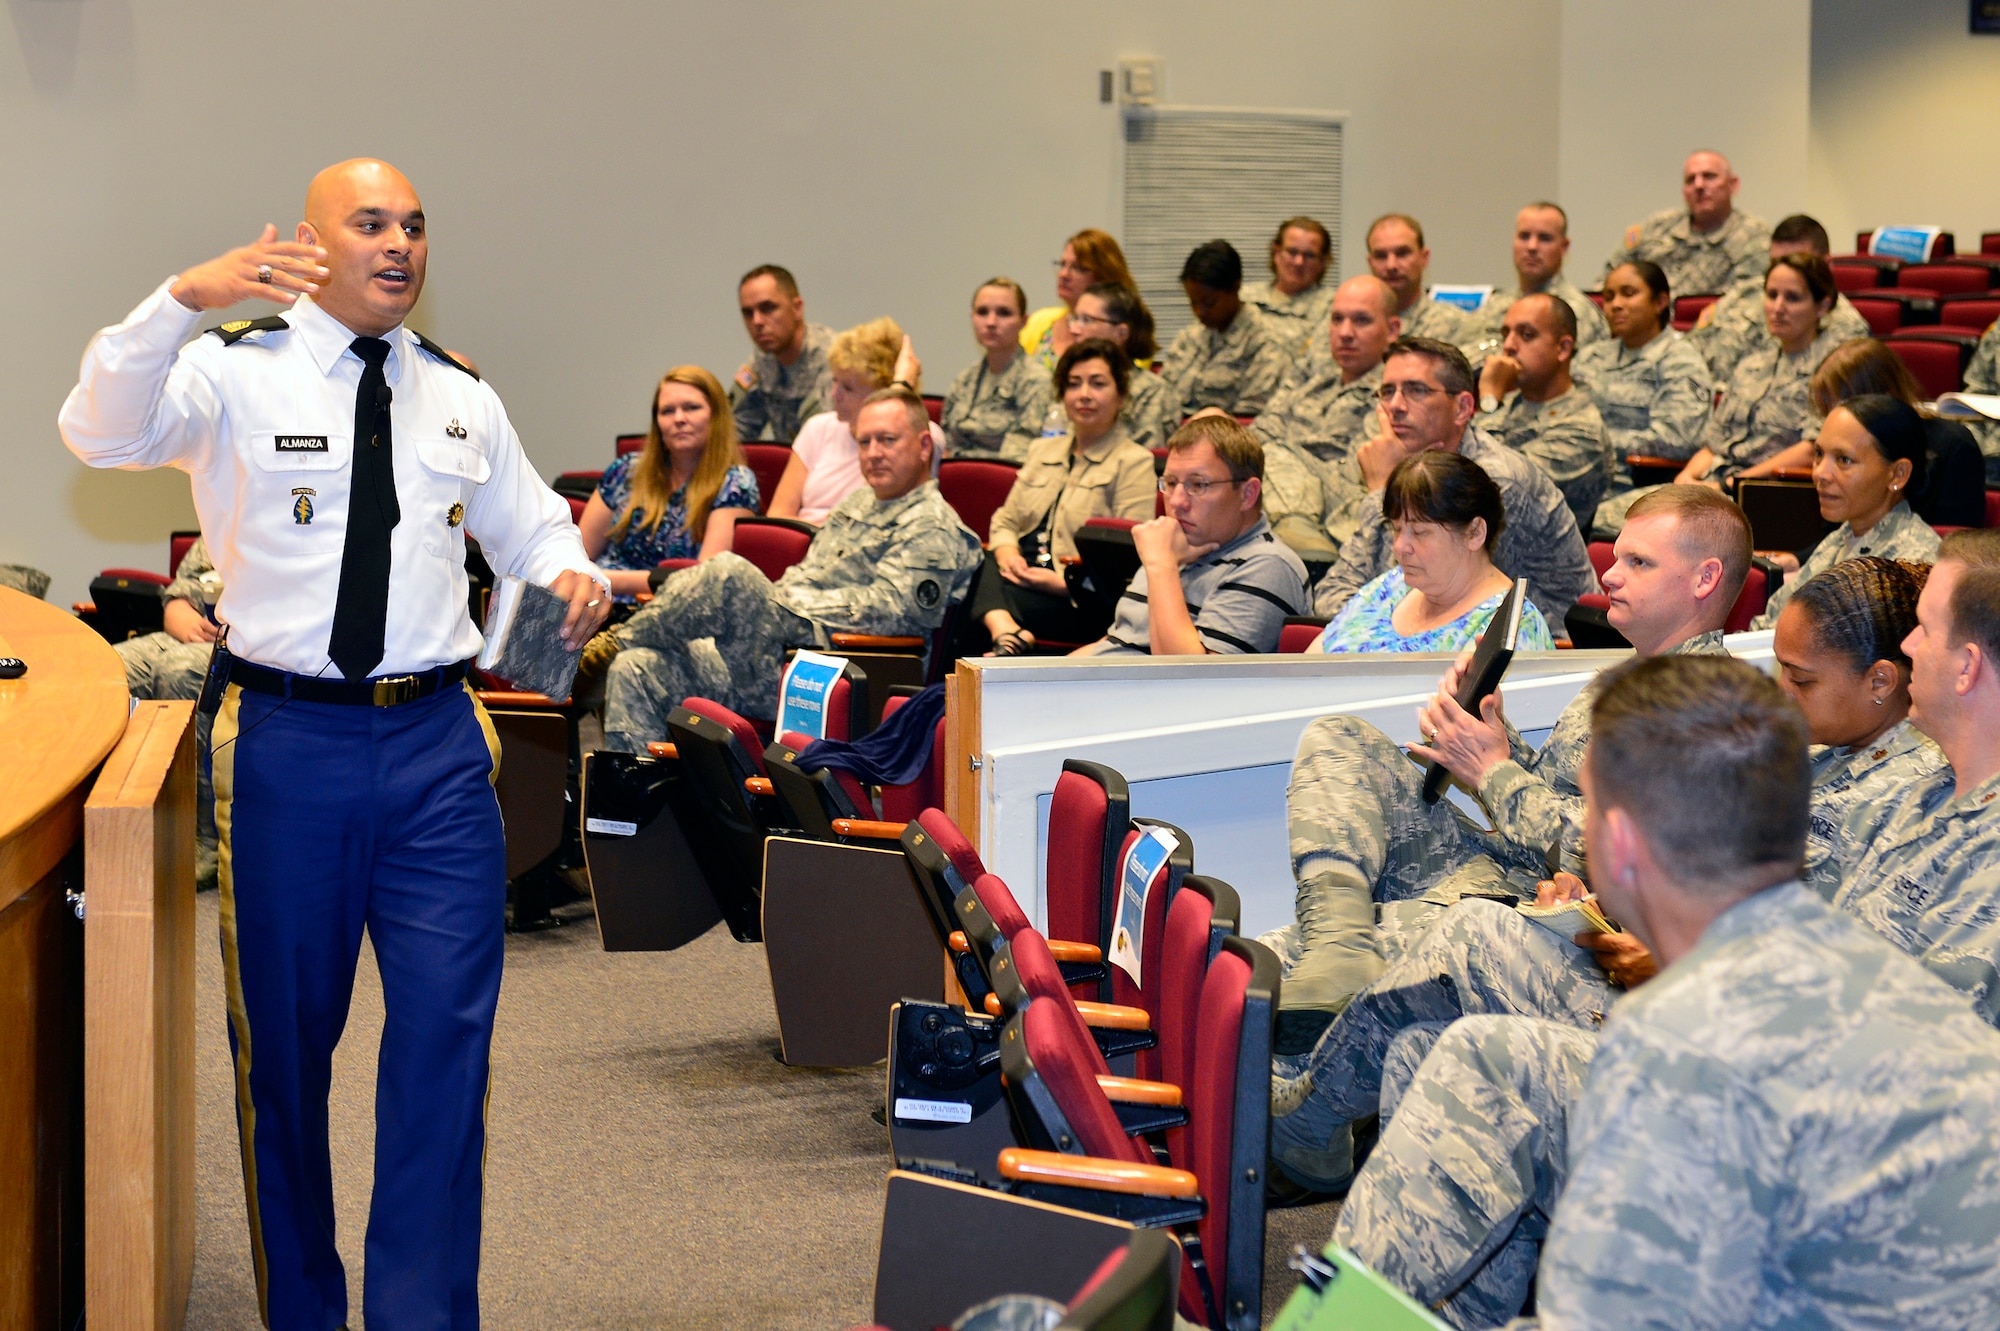 MCGHEE TYSON AIR NATIONAL GUARD BASE, Tenn. -  Army Sgt. Maj. Manuel Almanza, the senior enlisted adviser for the Special Assistant to the Chief, National Guard Bureau, shares his perspective on how enlisted members serve general officers here Aug. 20, 2015, during the General Officer Support Staff Course.  The Sergeant Major advises general officers on matters regarding enlisted personnel and serves as an enlisted liaison between the National Guard Bureau's joint staff and the Army and Air National Guard's readiness centers. (U.S. Air National Guard photo by Master Sgt. Jerry Harlan/Released)
